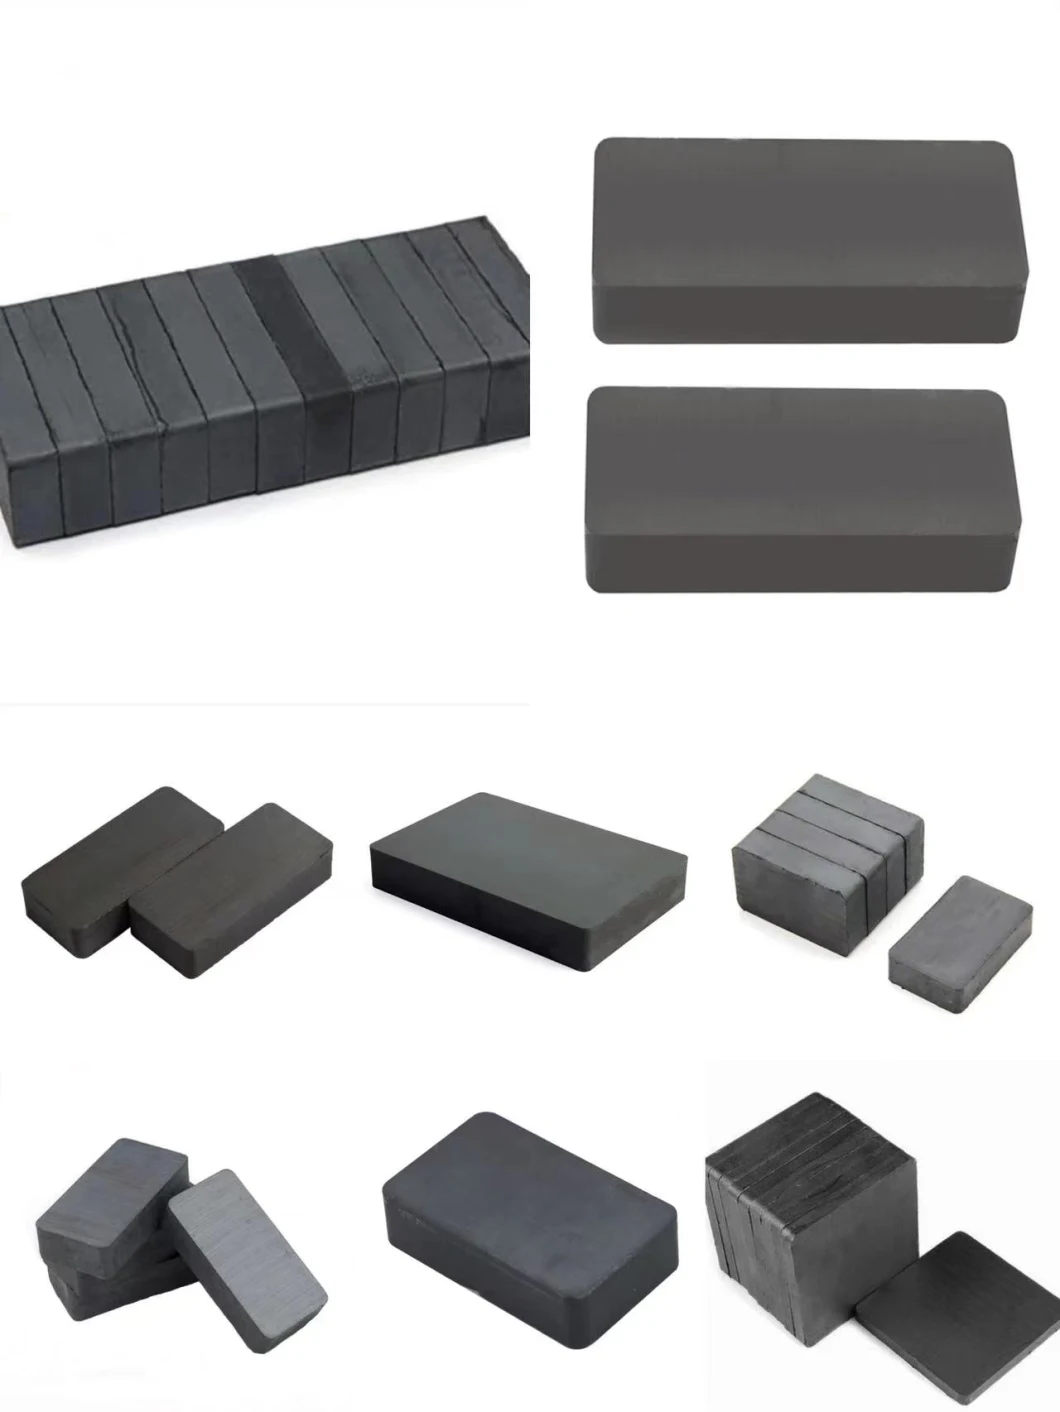 Ferrite Magnets Block Motor Magnets Are Used in Industry